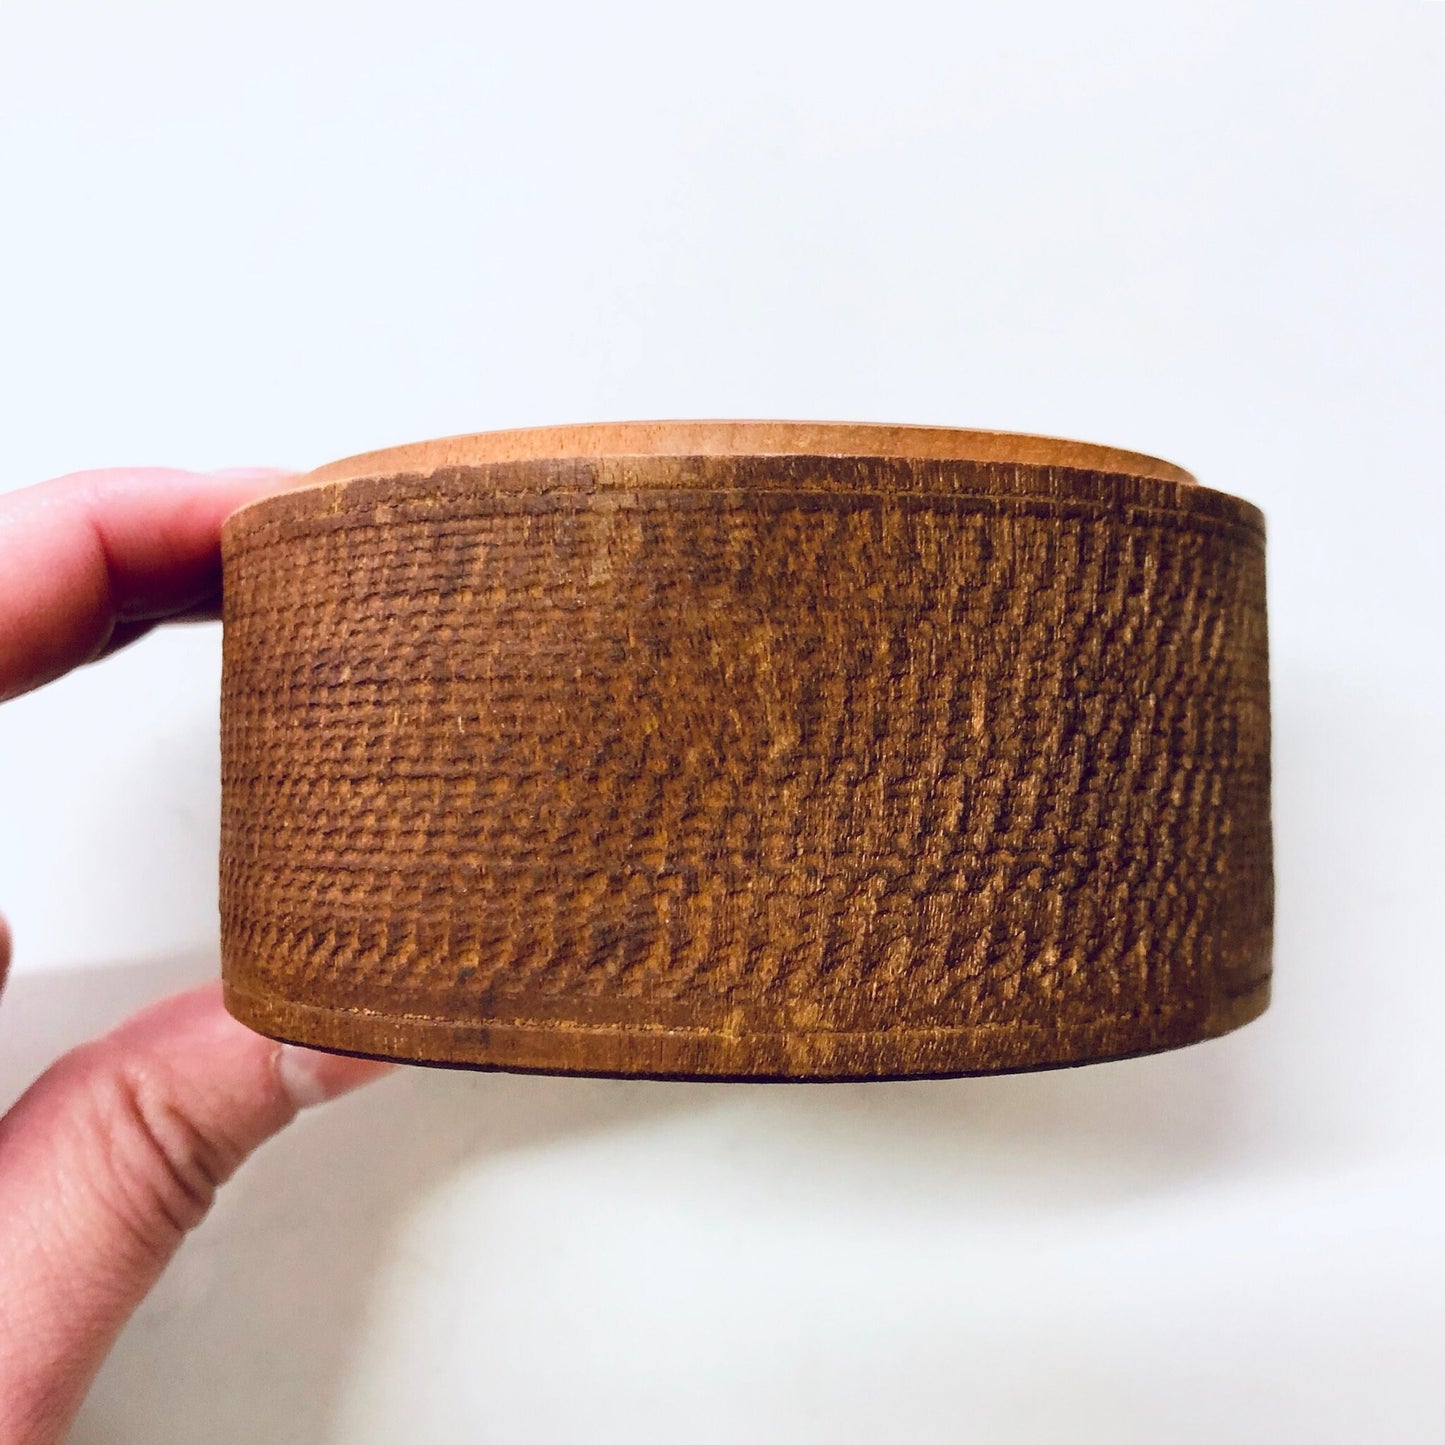 Handcrafted vintage wooden trinket box with intricate carved texture, perfect for storing small items or as unique home decor